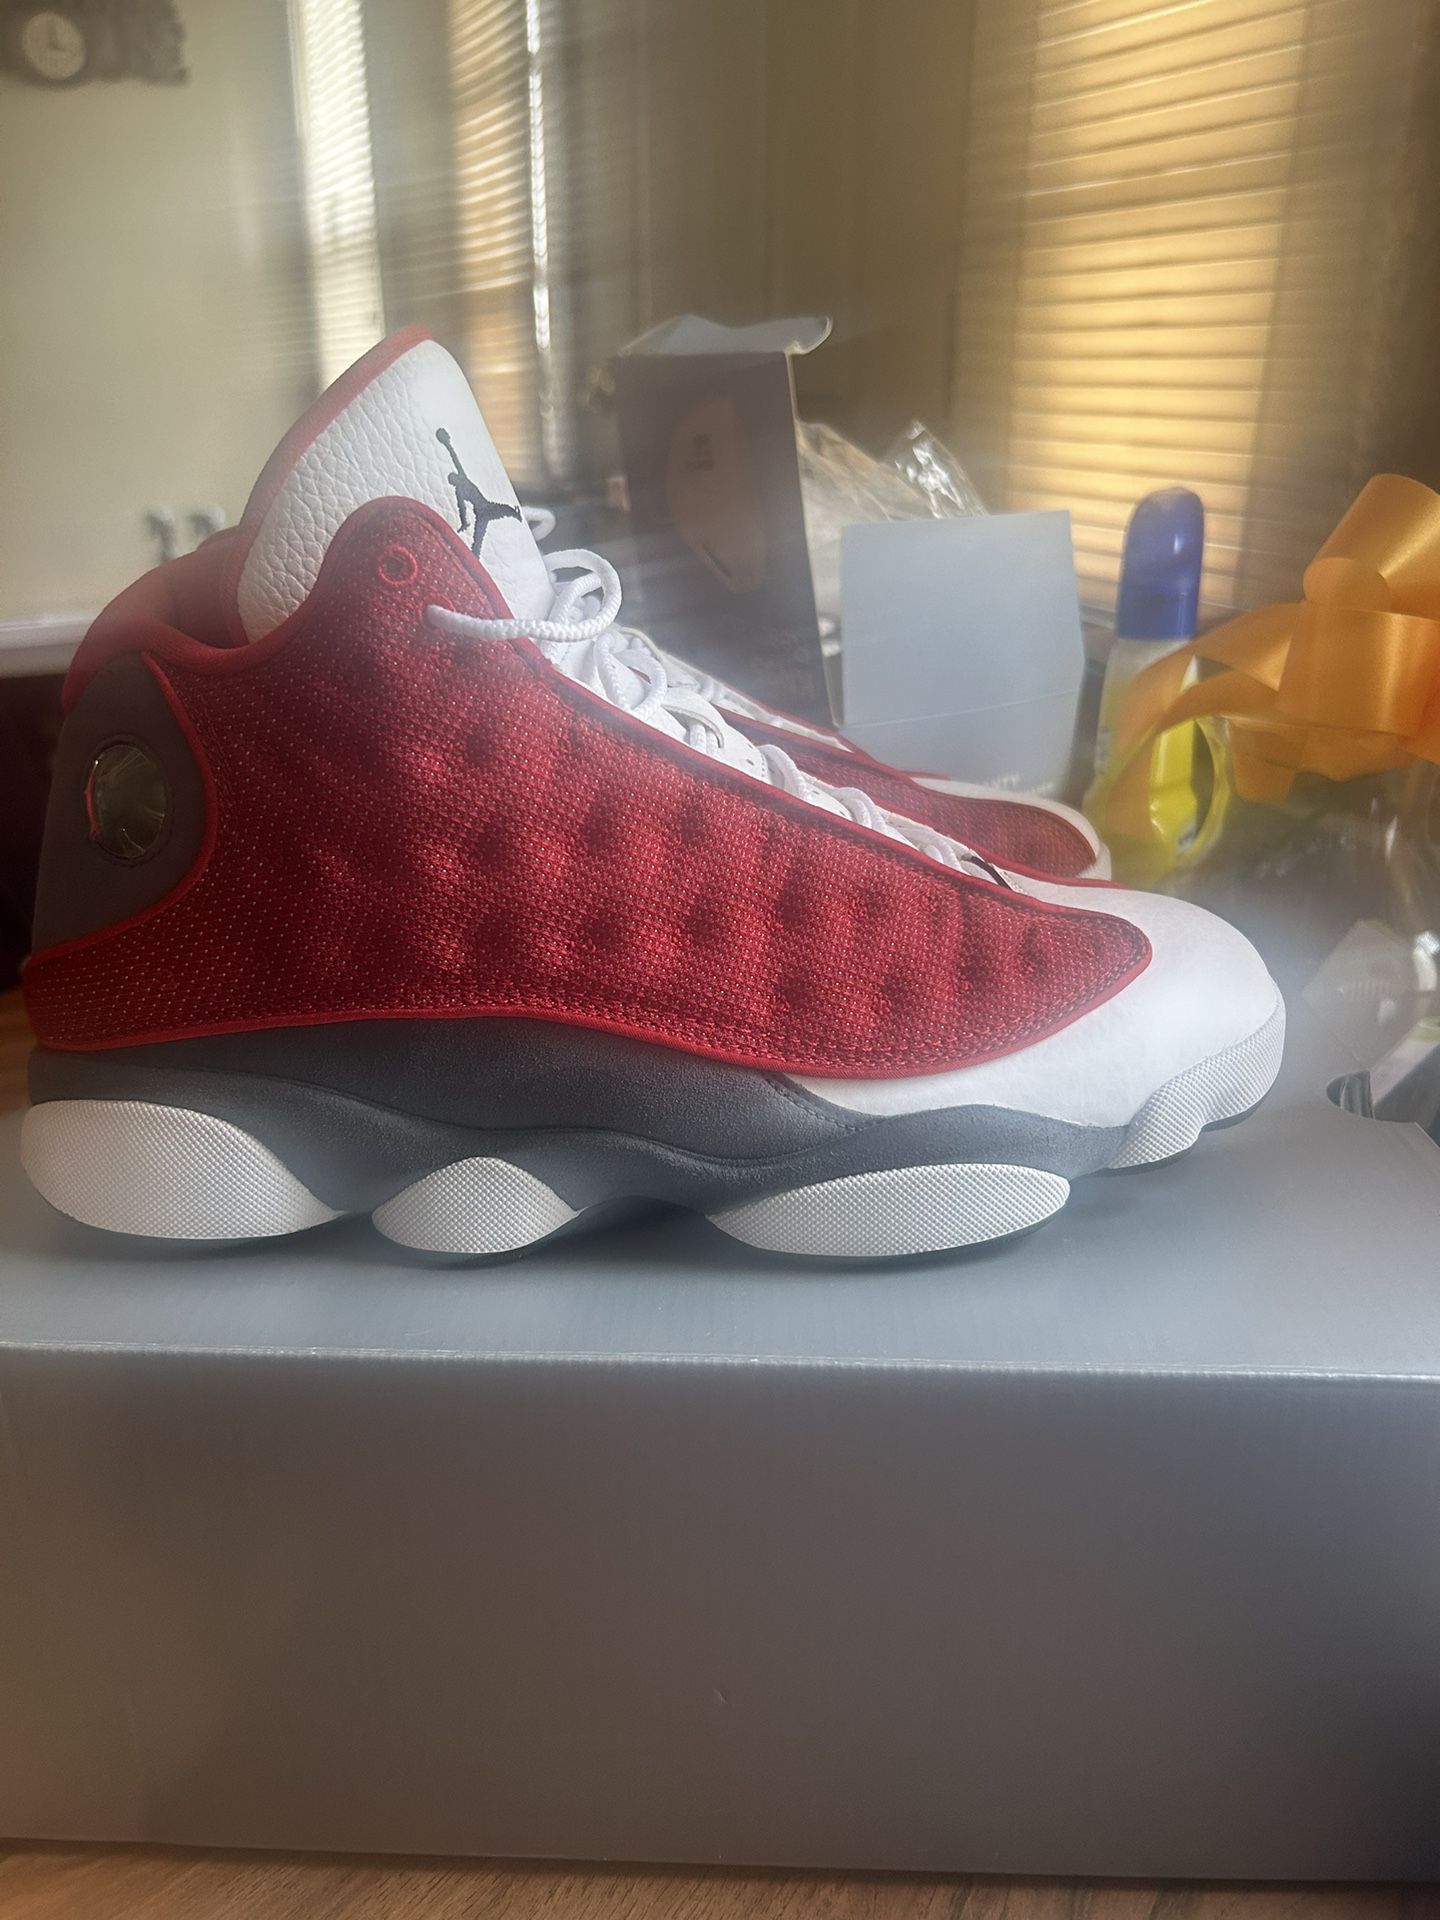 Air Jordan 13 Size 10 Only Wore Twice